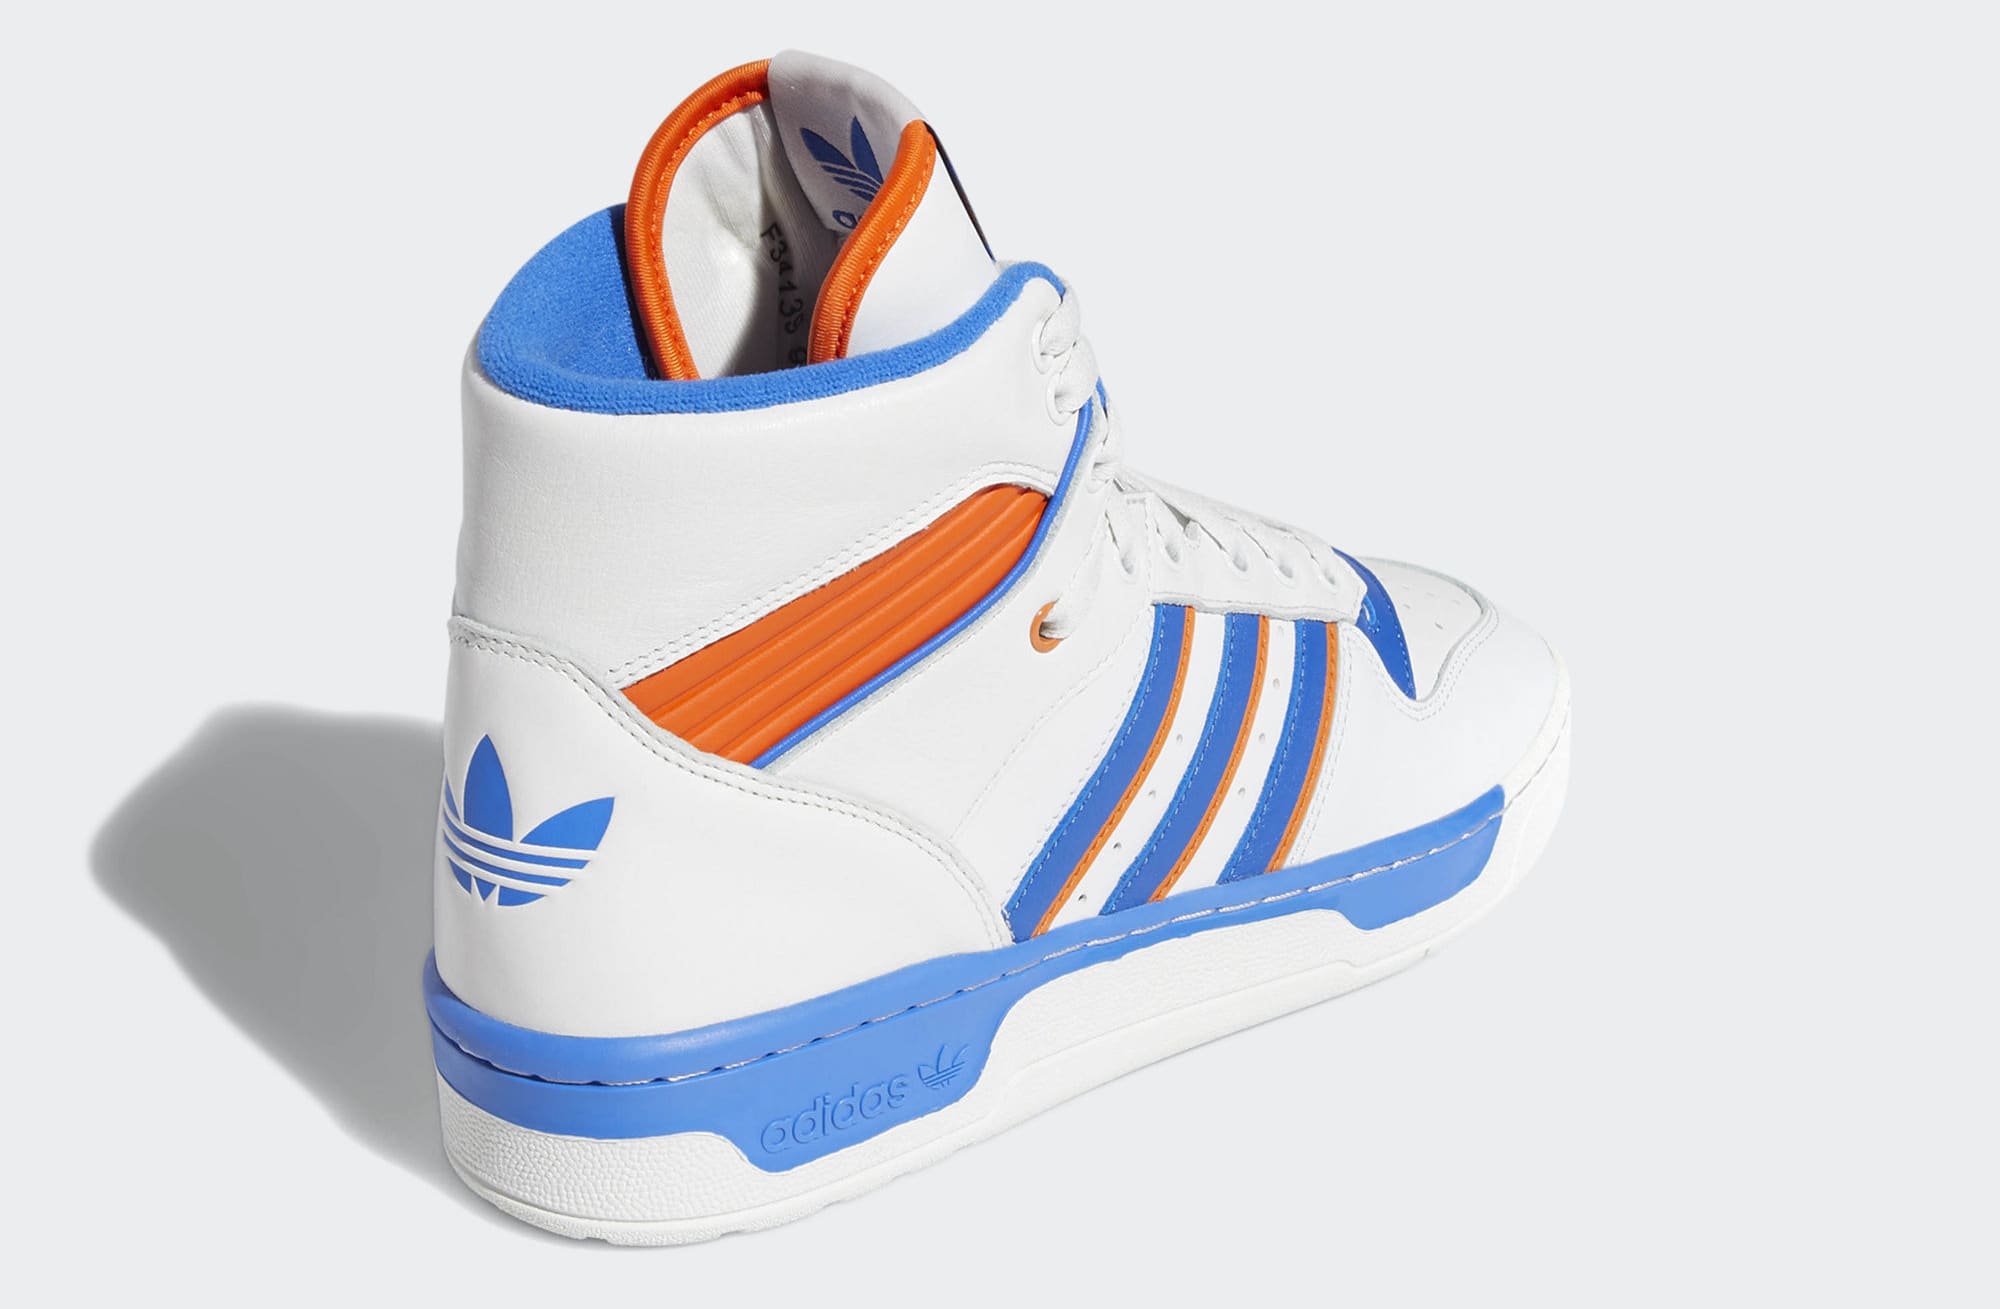 Minero misericordia Clasificación Adidas Is Bringing Back This Patrick Ewing Shoe From the '80s | Complex